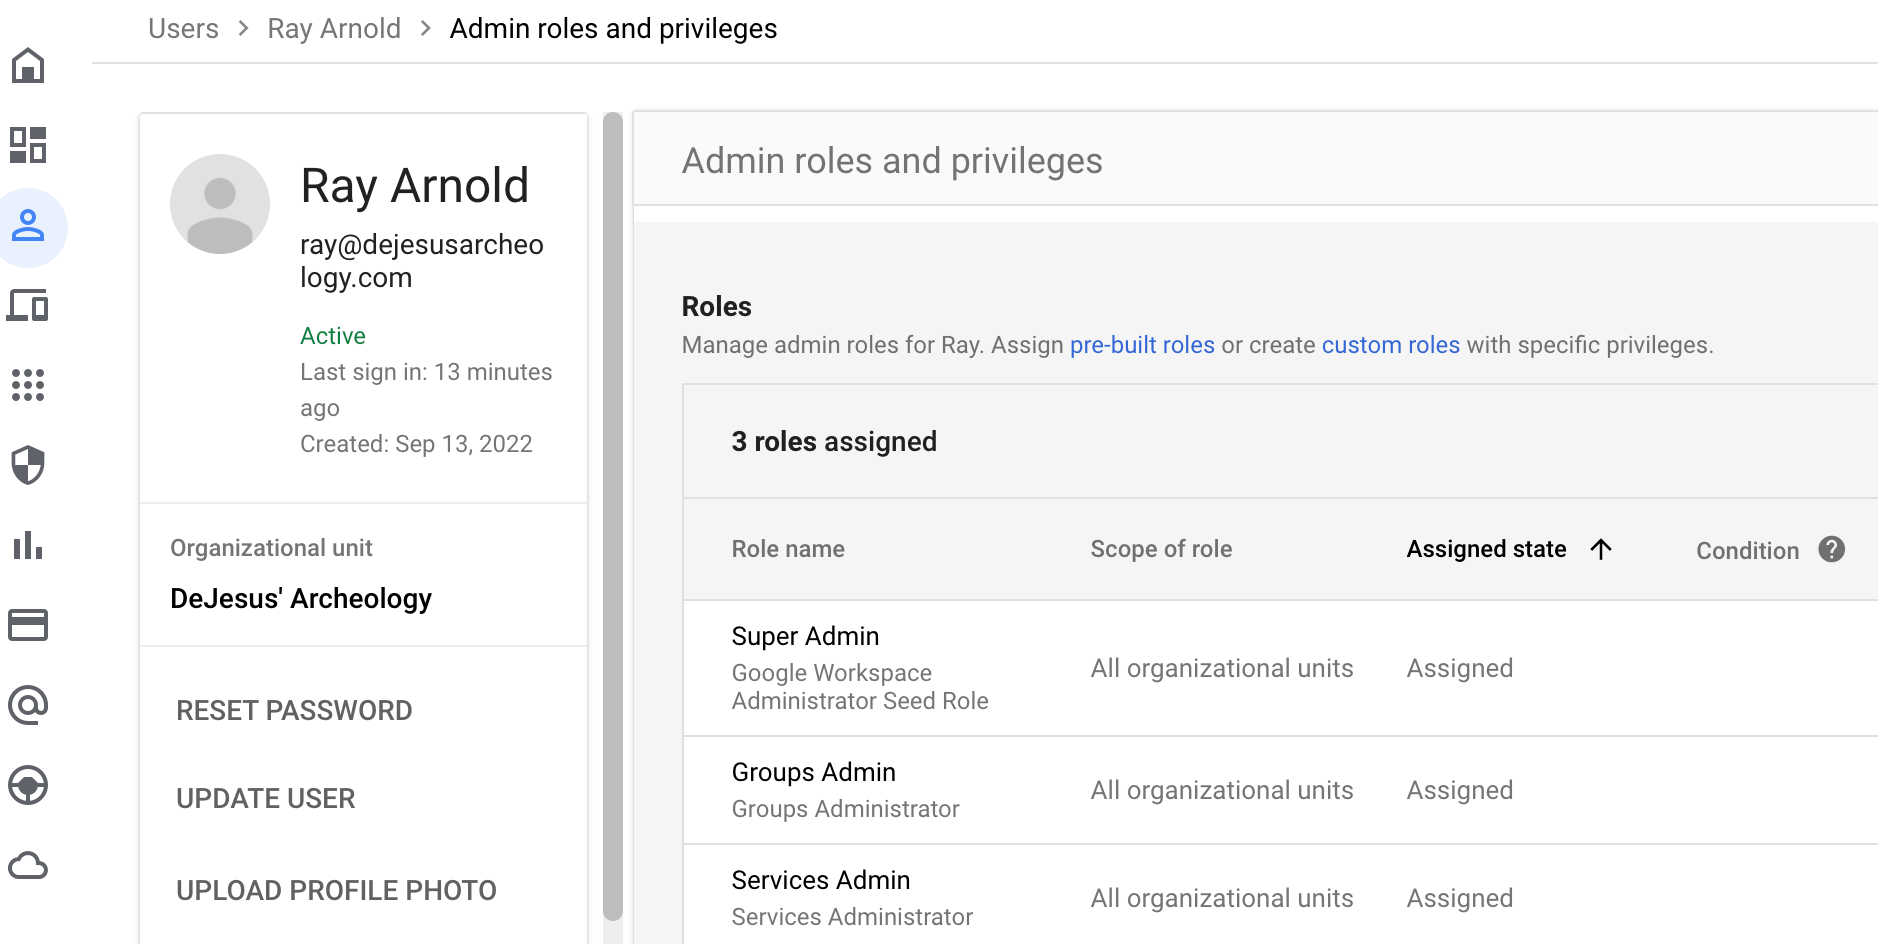 Ray Arnold user created in Google Workspace with admin privileges